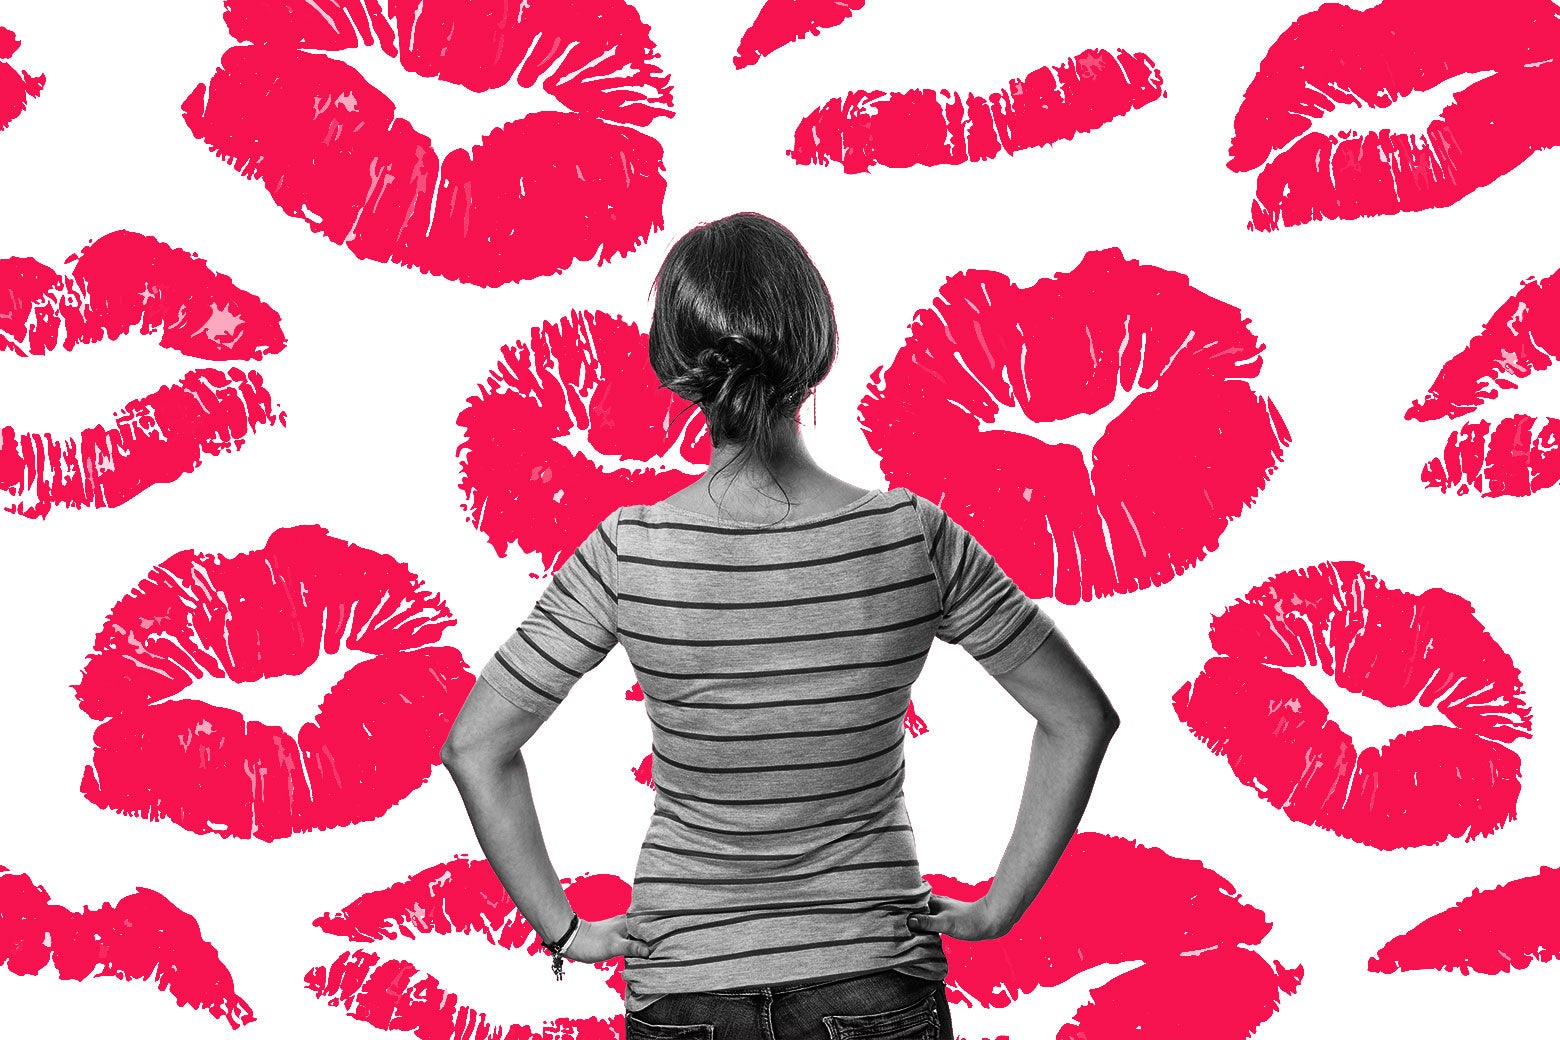 A person stands with their hands on their hips and their back to the camera in front of a background of illustrated kisses.